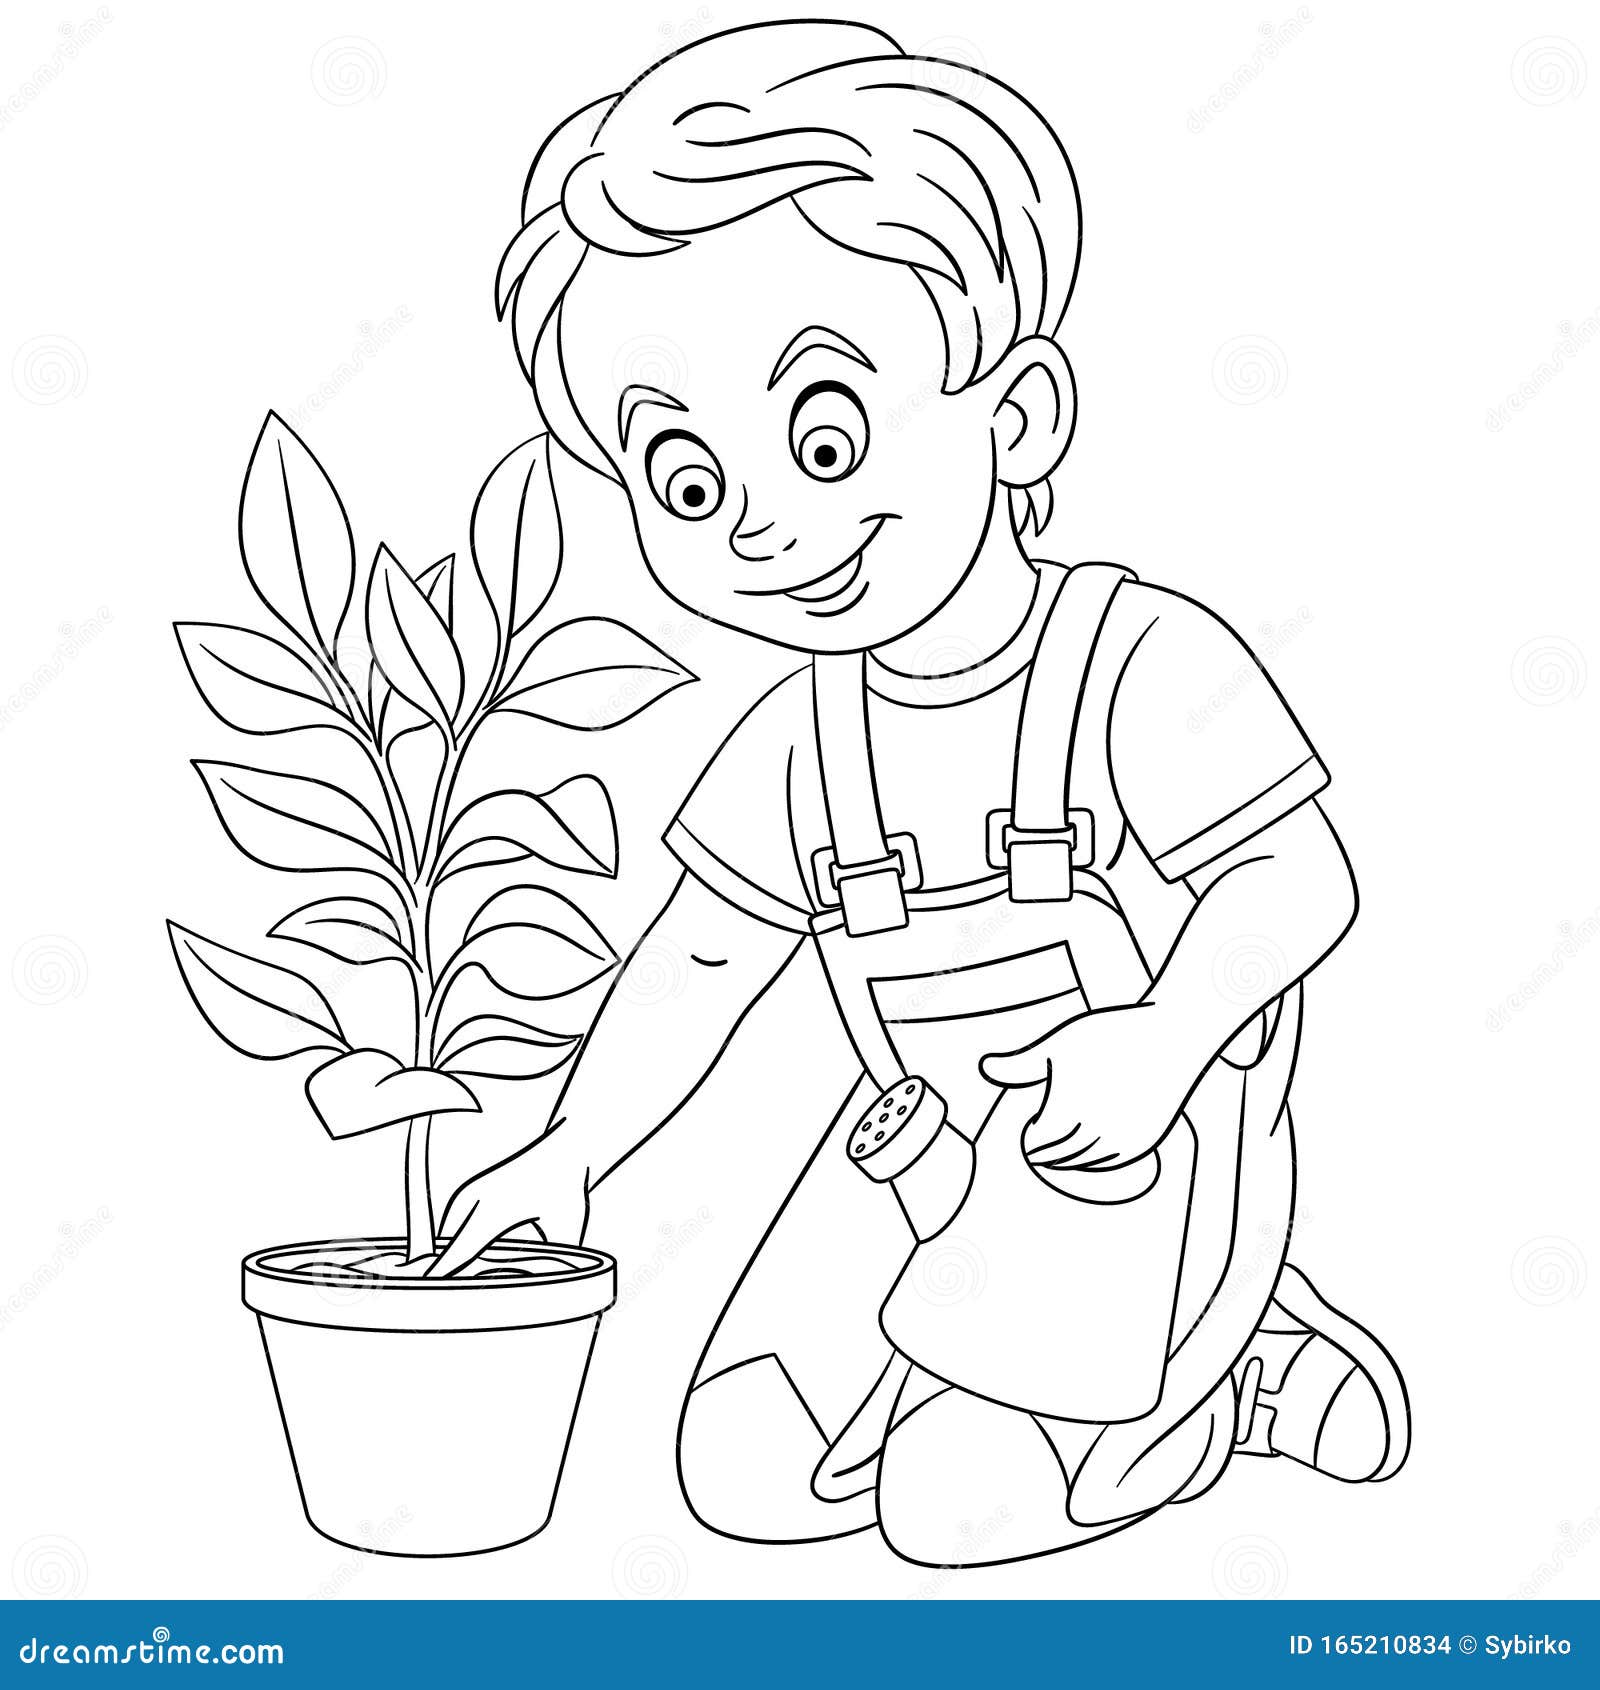 Coloring Page with Boy Planting Tree Stock Vector   Illustration ...